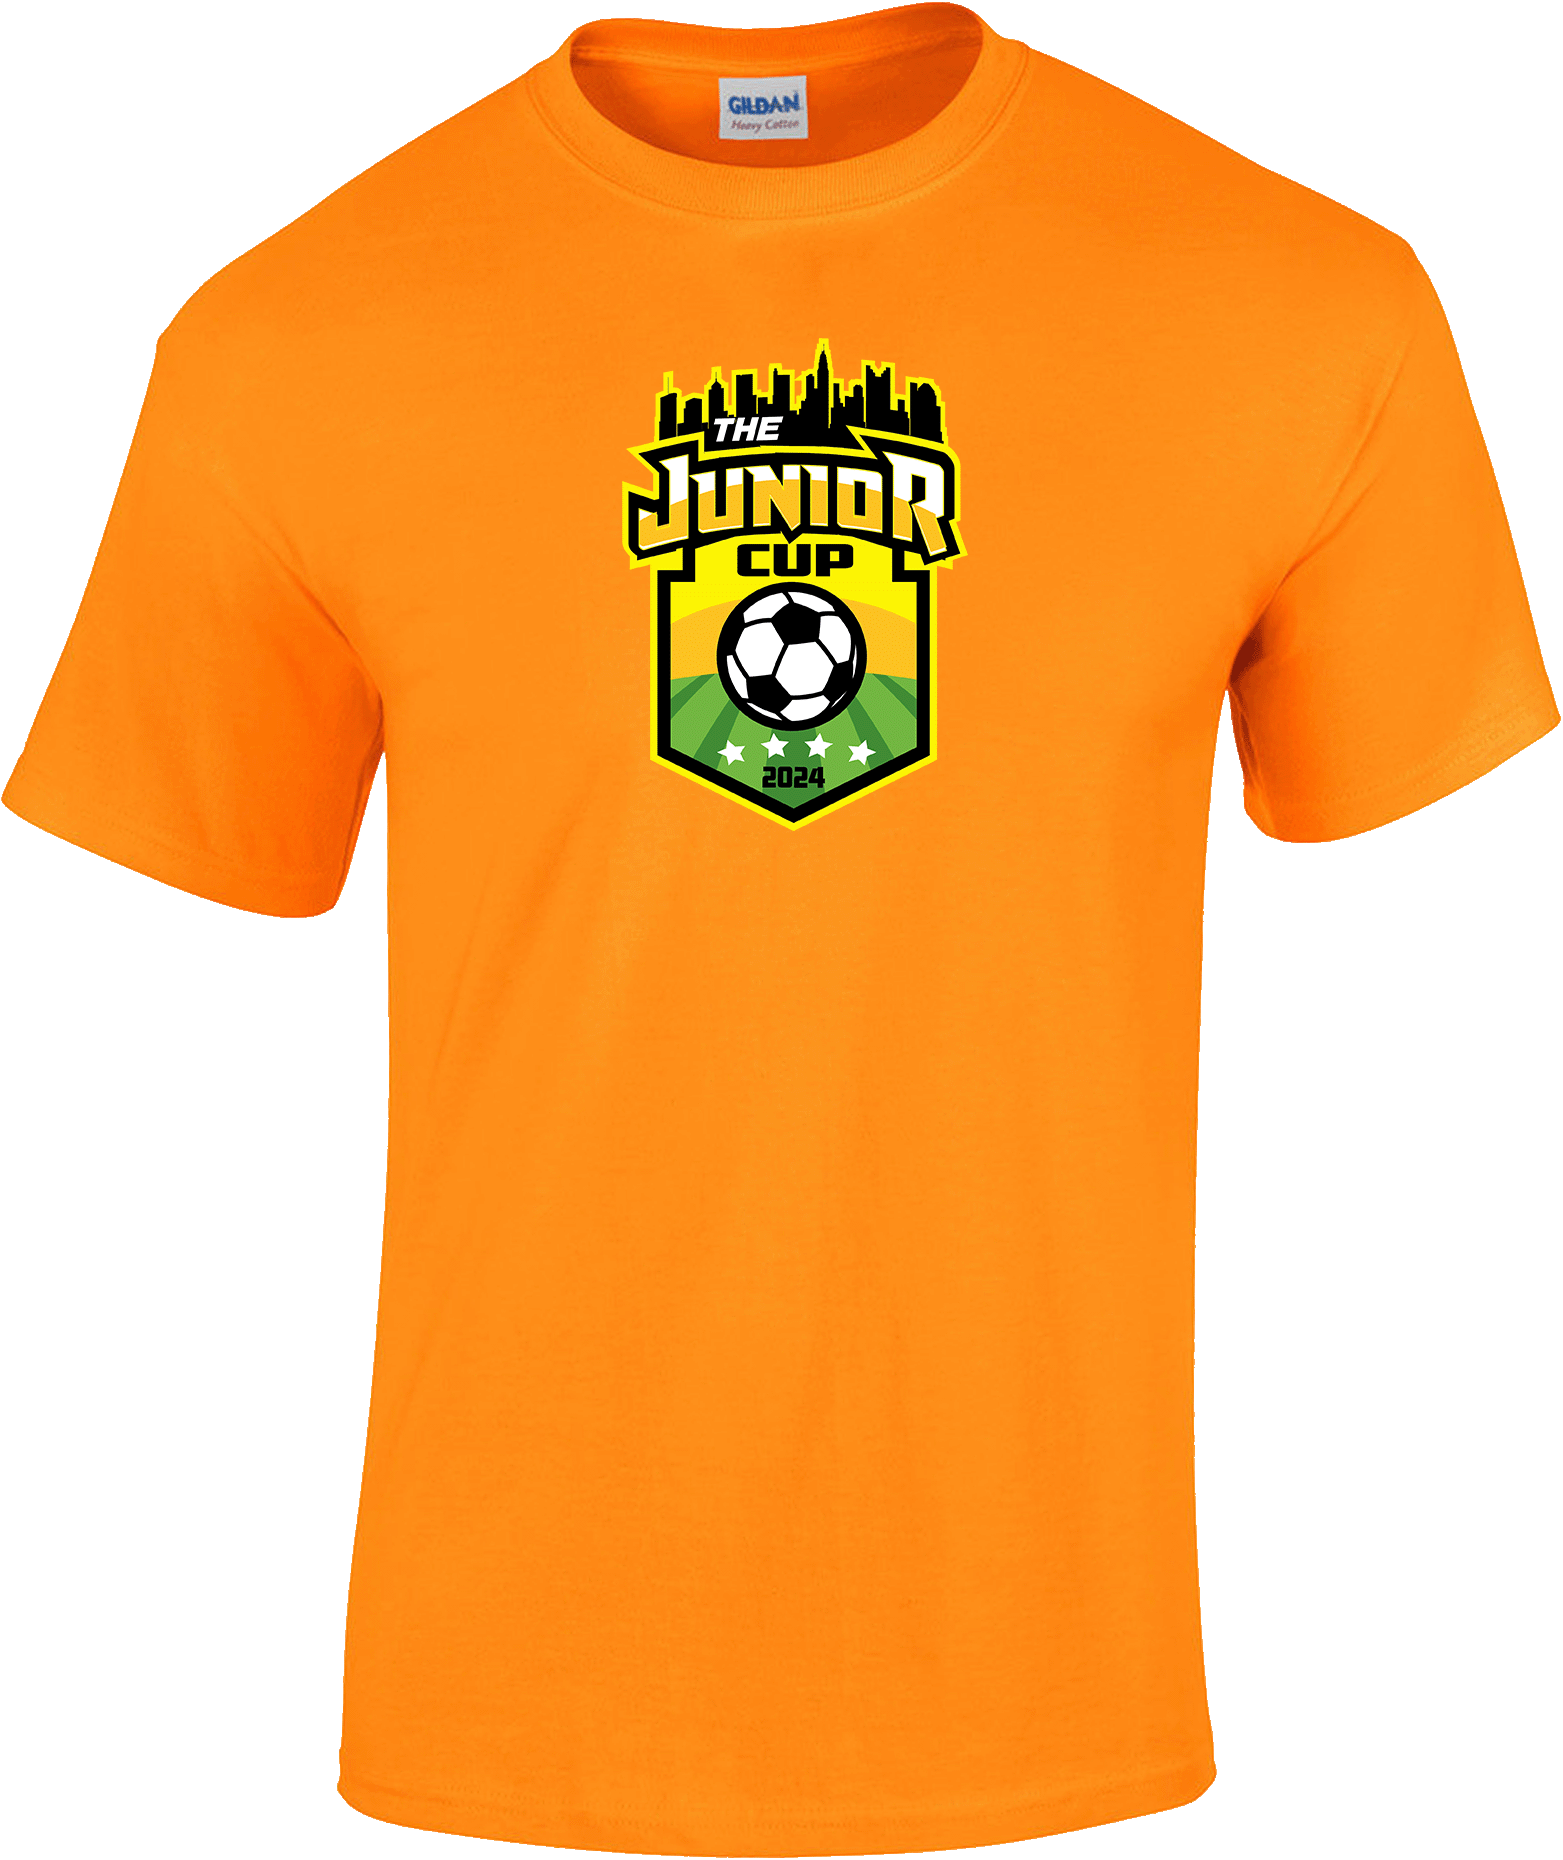 Short Sleeves - 2024 The Junior Cup